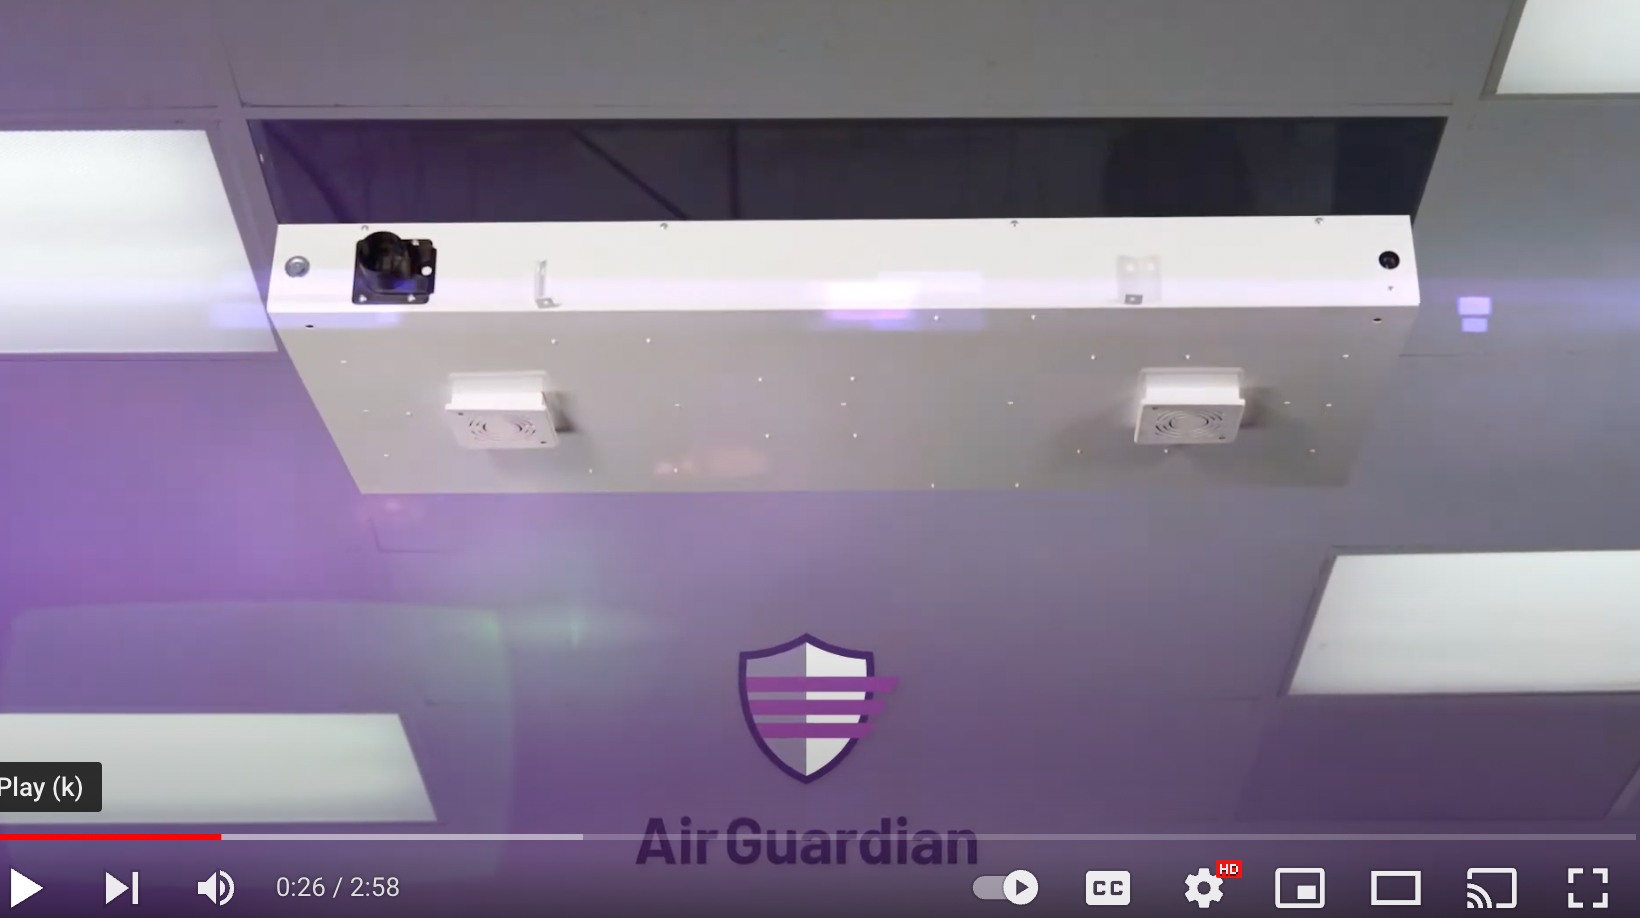 Air Guardian UVC Disinfection Technology - Product Video